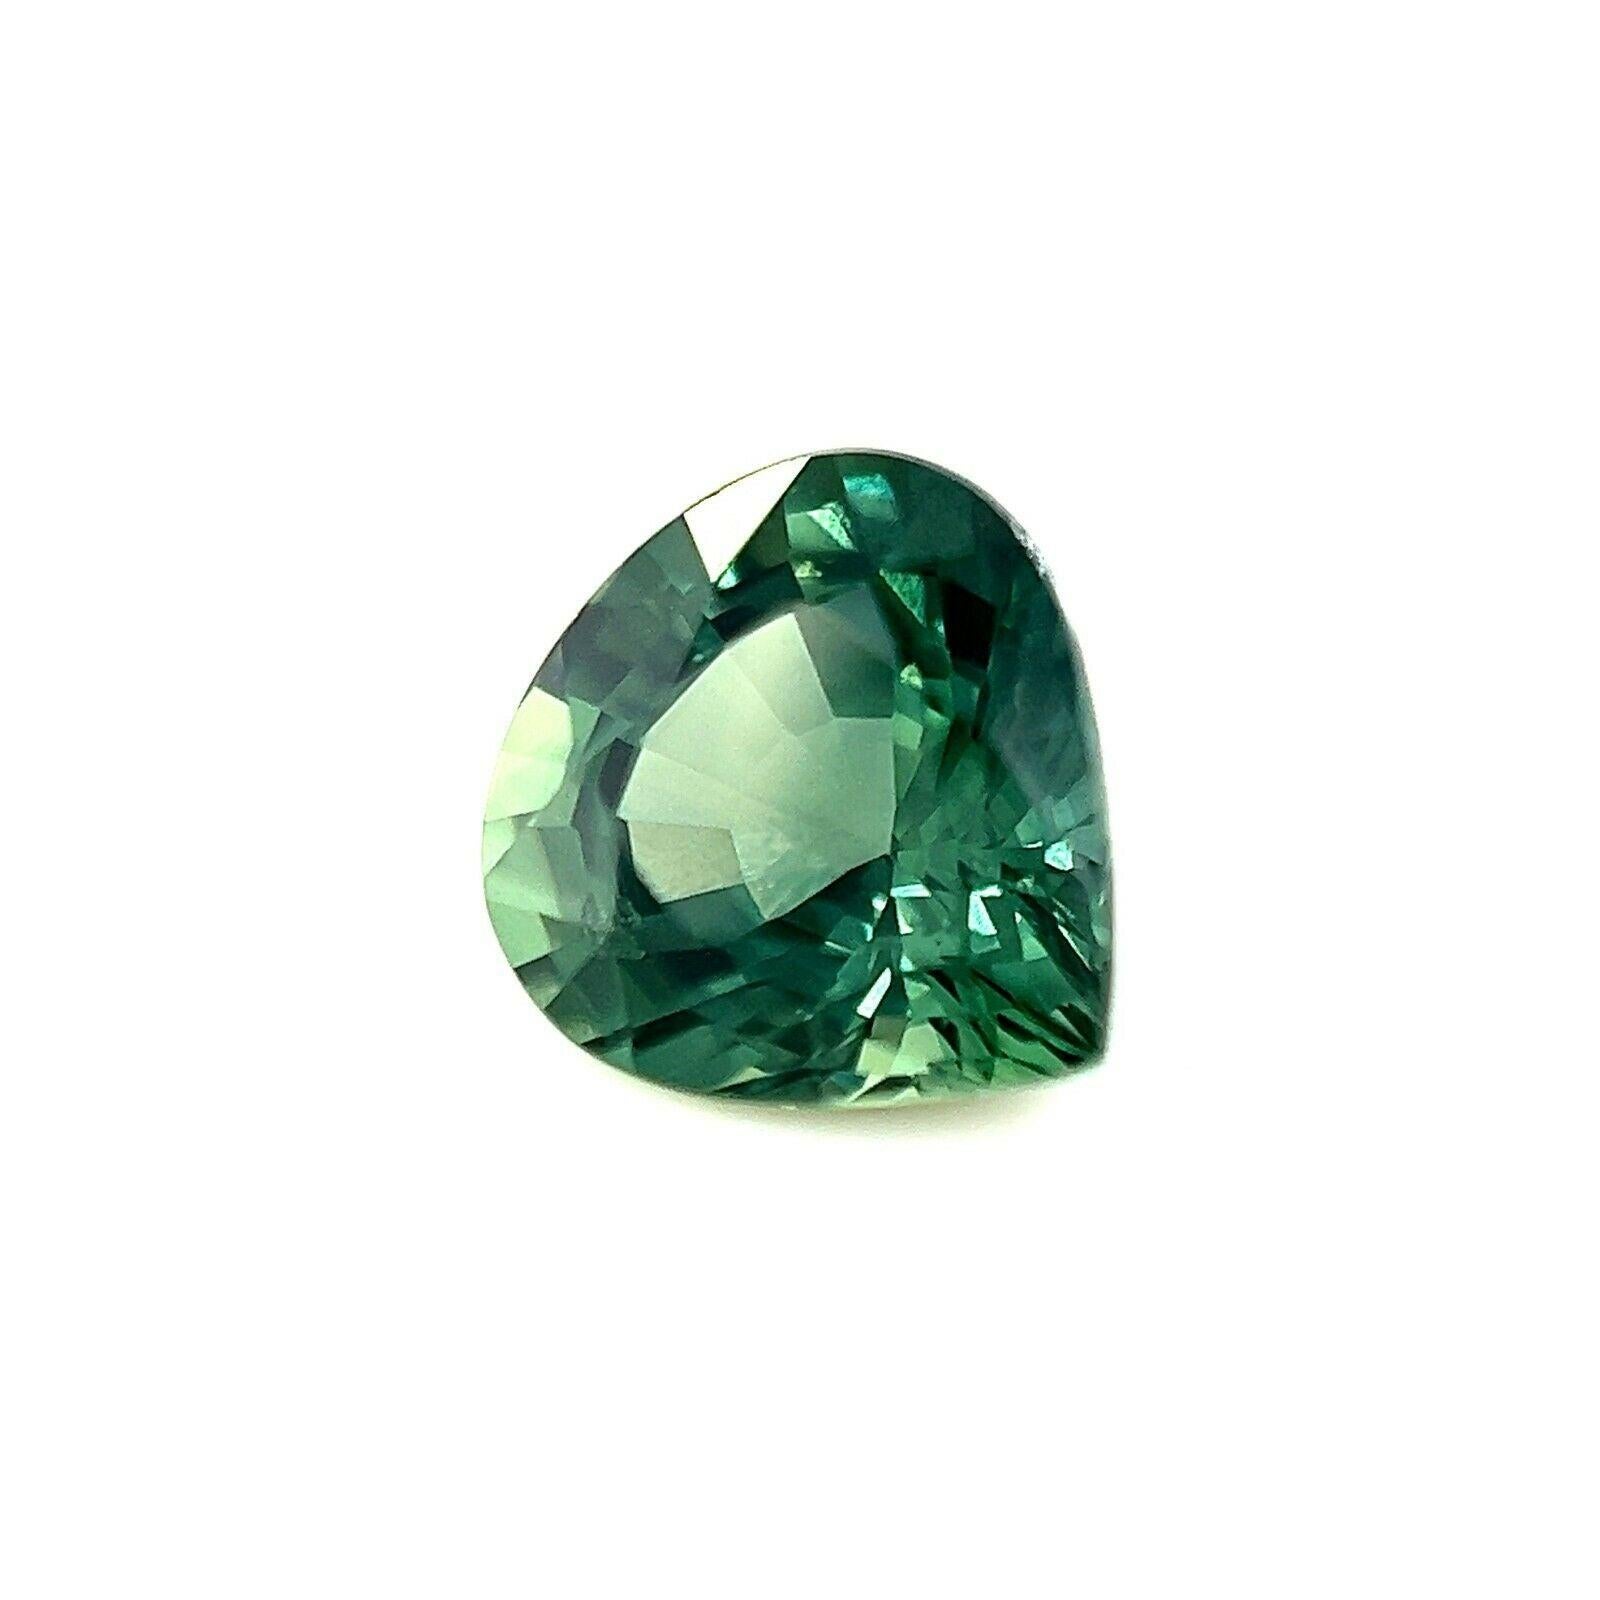 1.08ct Vivid Green Australia Sapphire Pear Teardrop Cut Loose Gem 6.3x6mm

Natural Vivid Green Australian Sapphire Gemstone.
1.08 Carat with a beautiful vivid green colour and very good clarity. Also has an excellent pear cut and polish to show